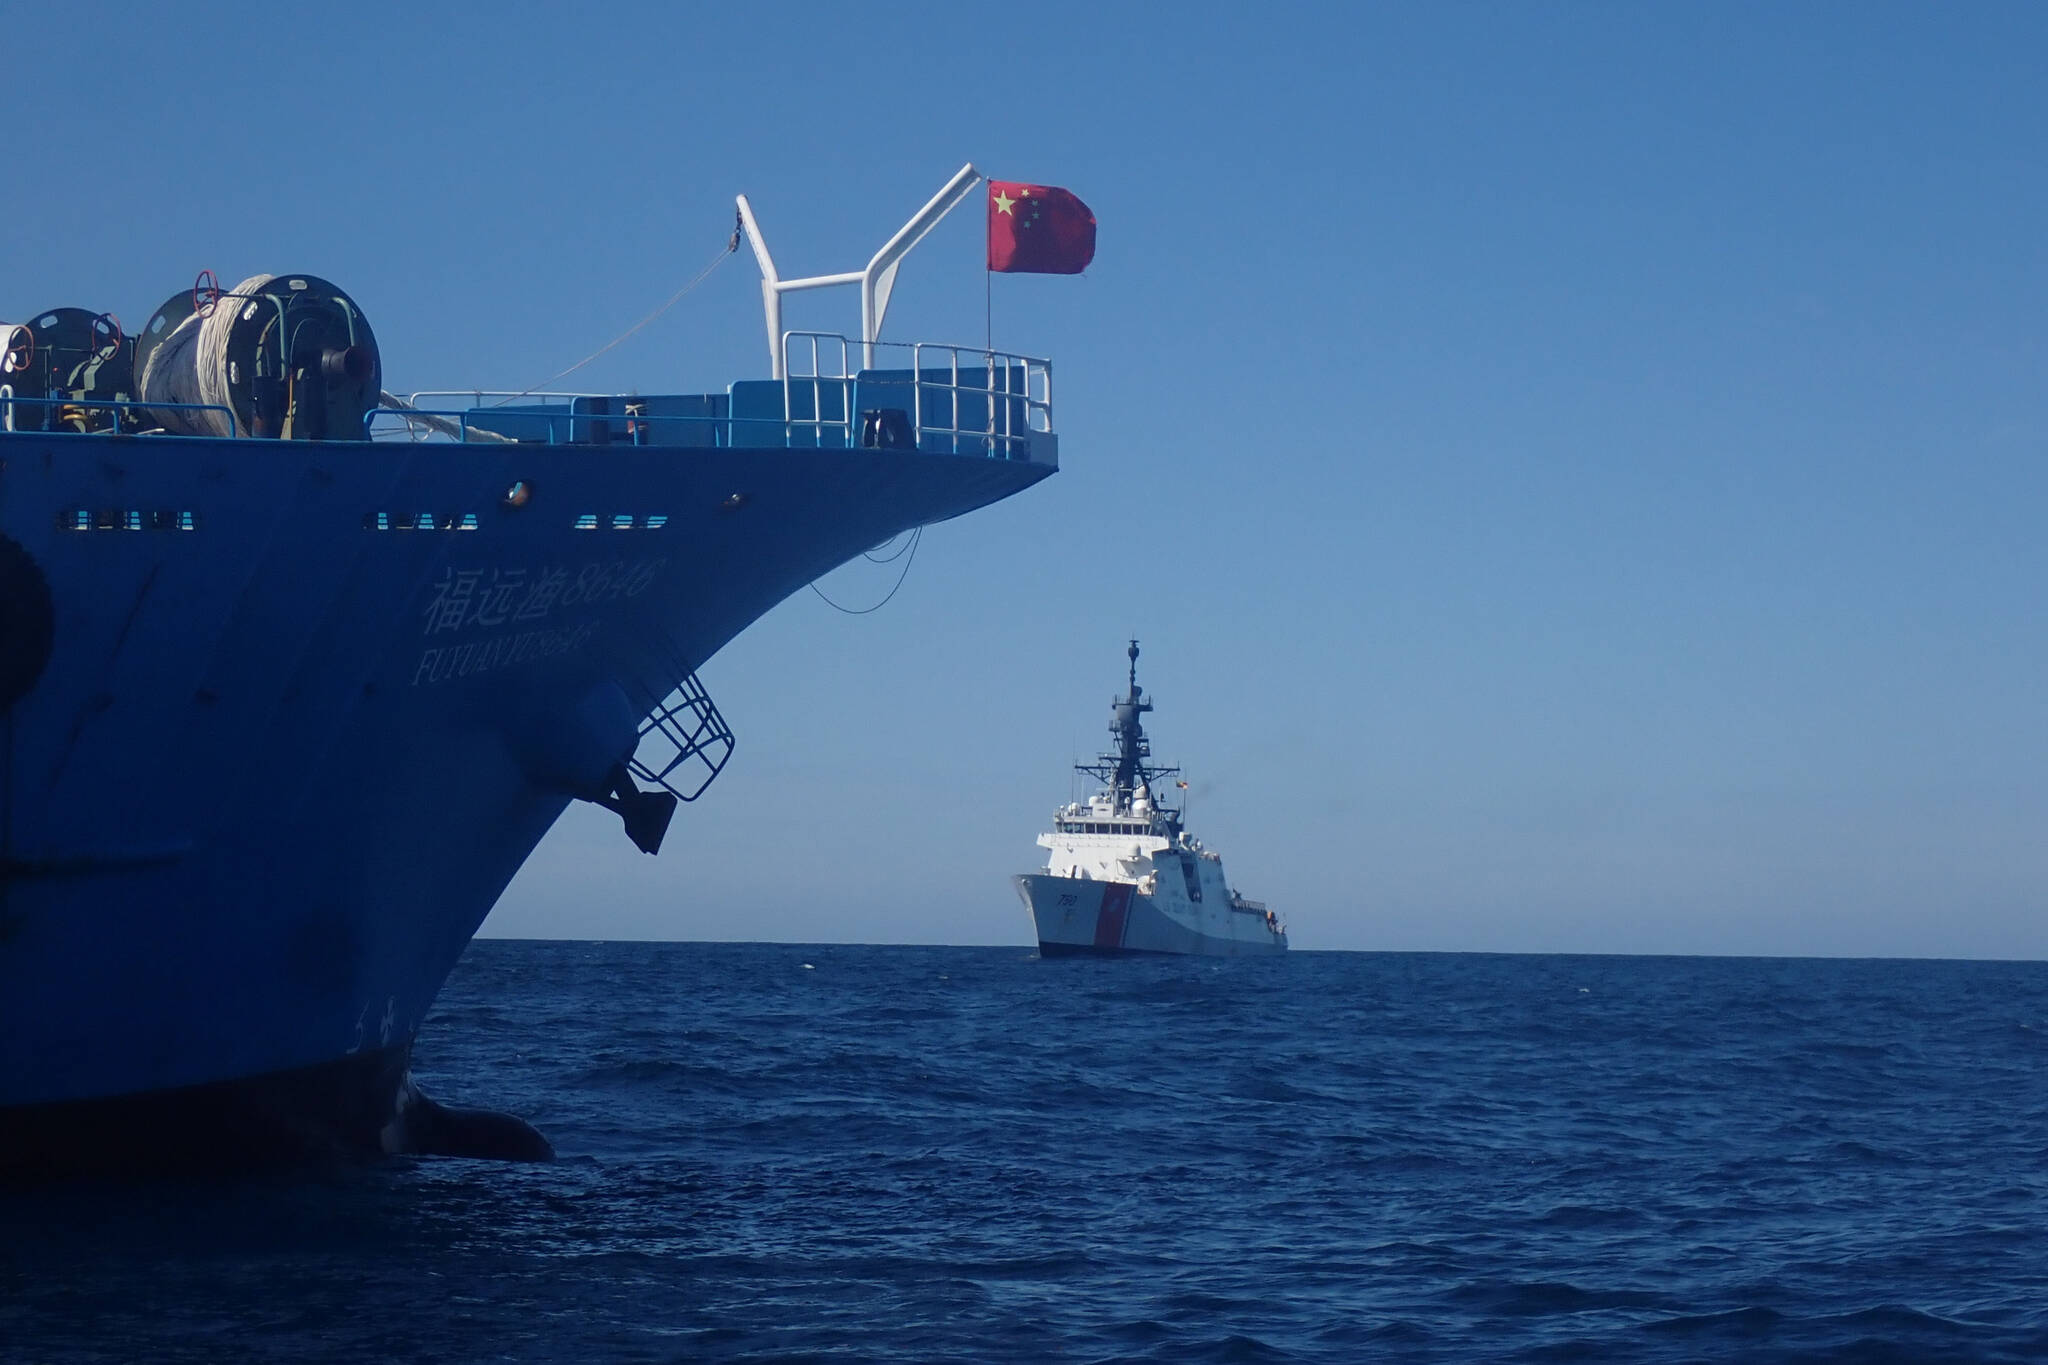 Crews aboard U.S. Coast Guard Cutter Bertholf prepare to board a fishing vessel flying the flag of the People’s Republic of China in the North Pacific on Sep. 21, 2021. (Courtesy photo / U.S. Coast Guard)